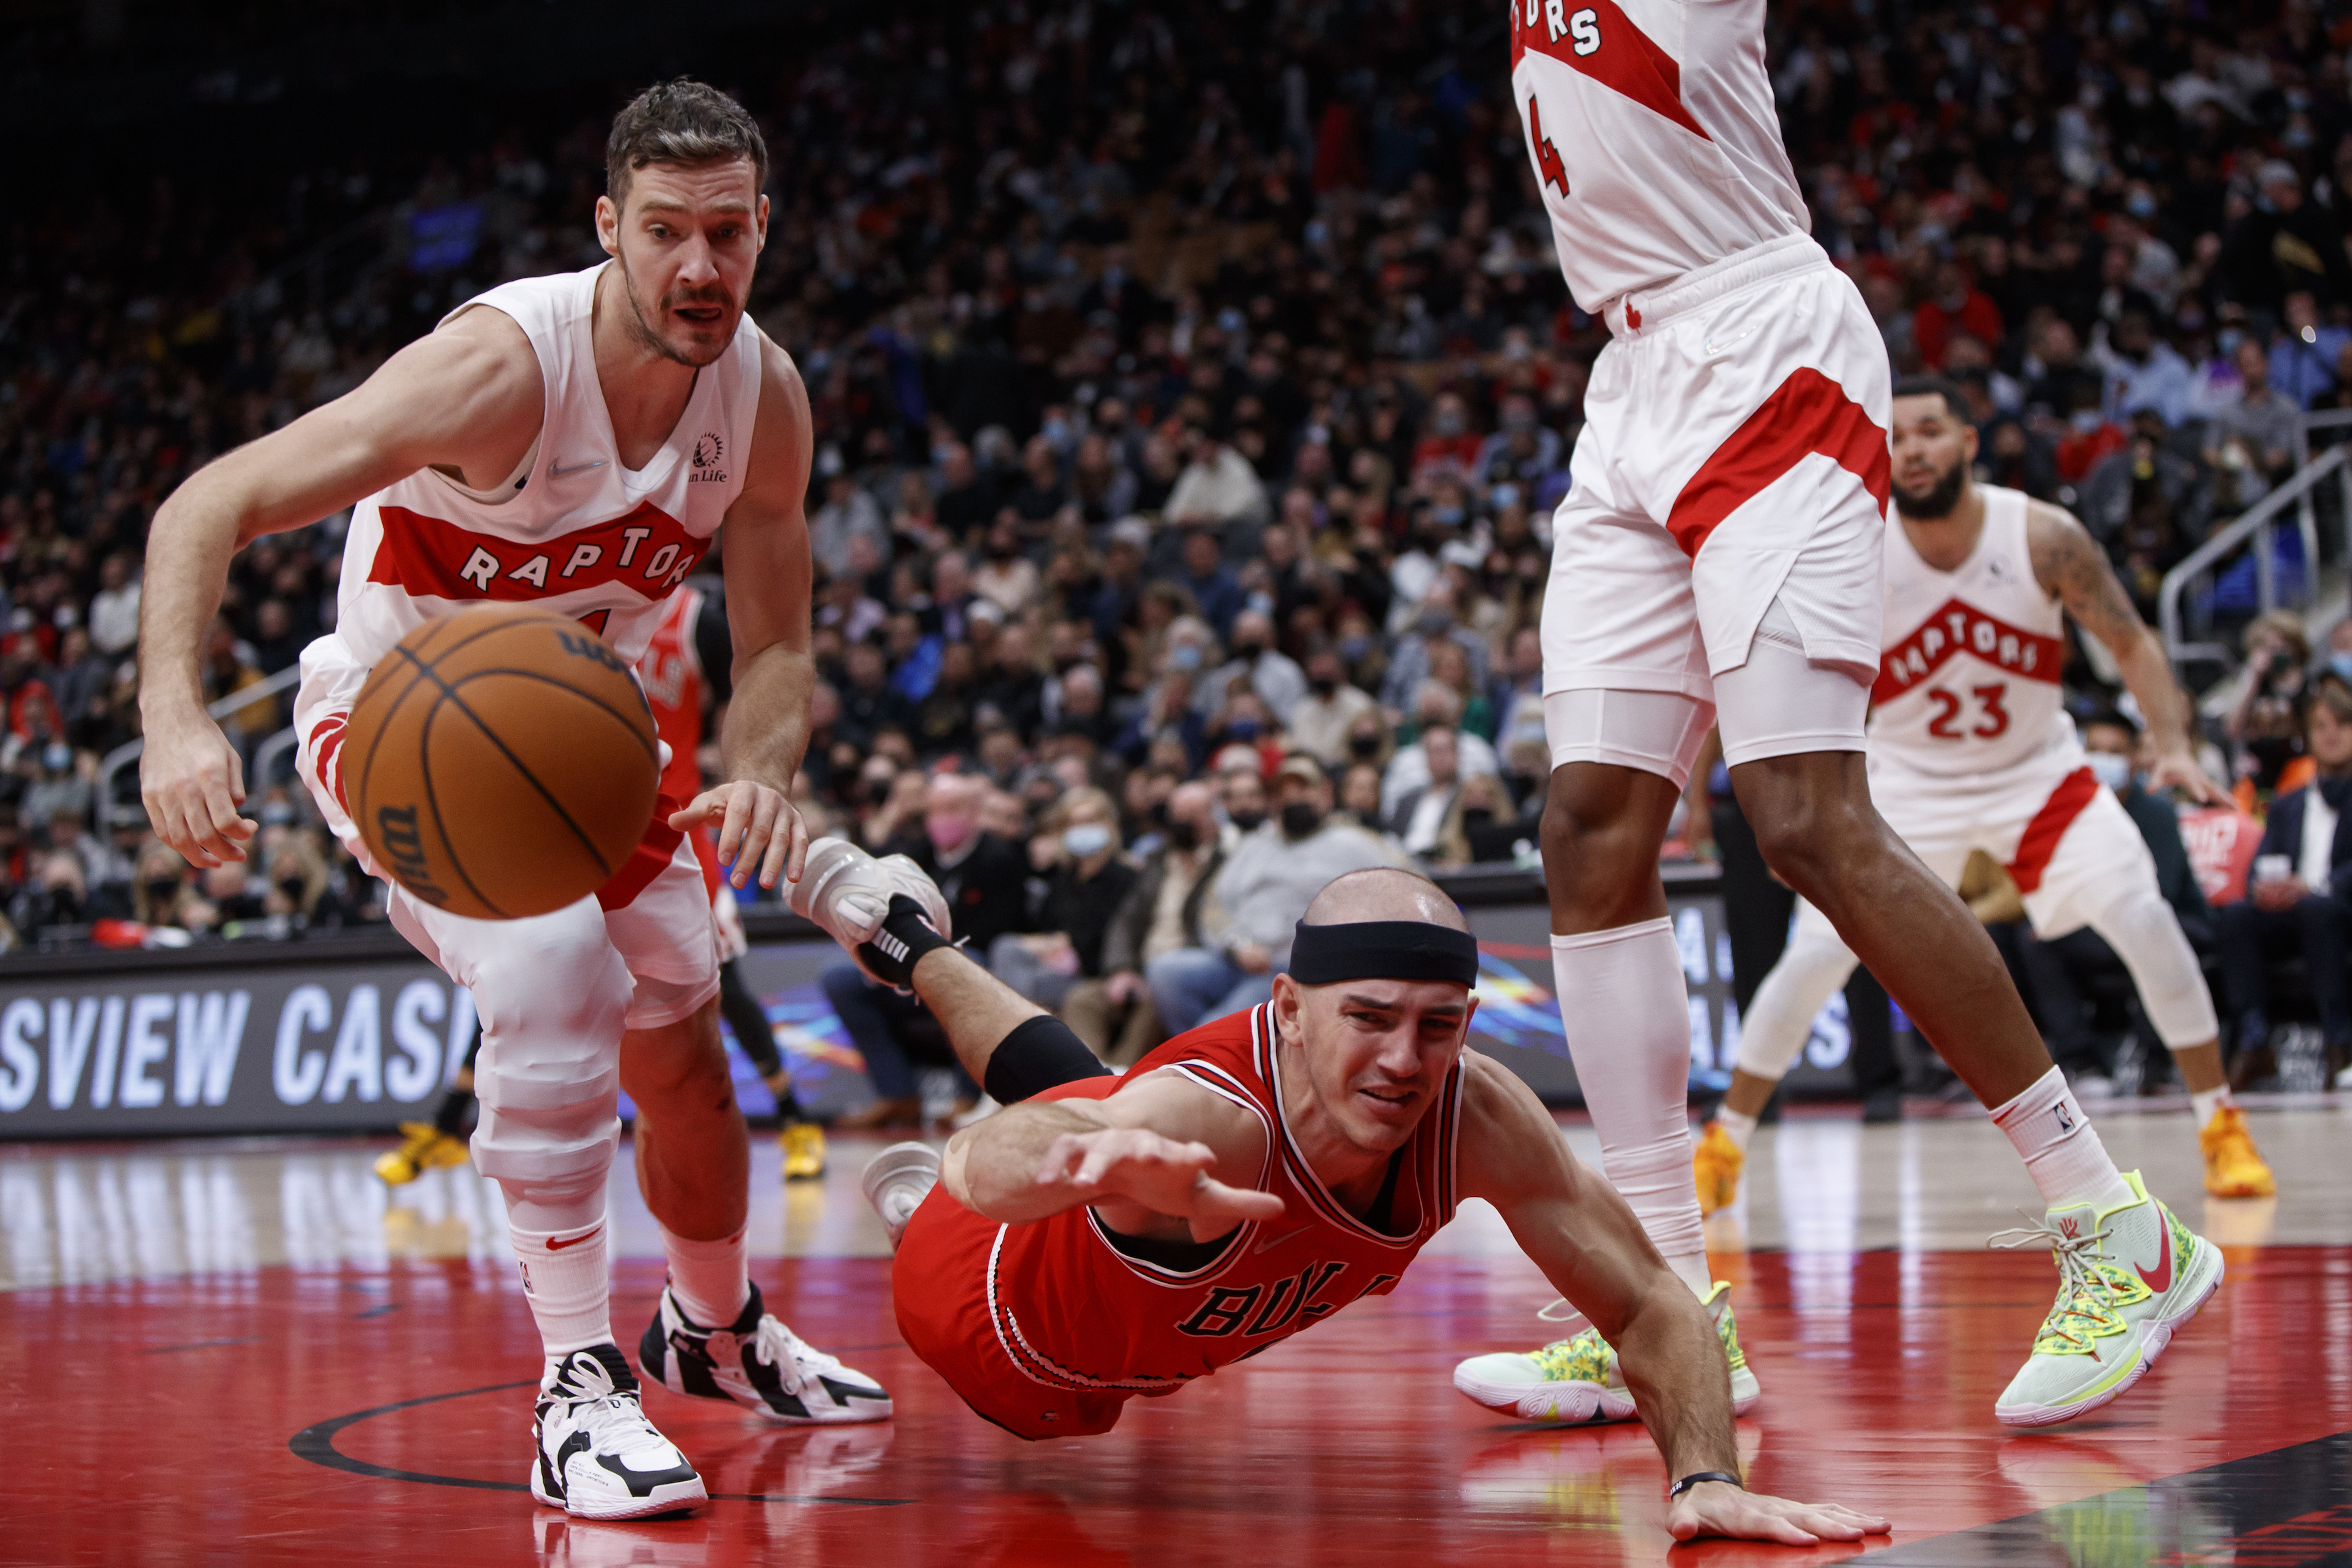 Chicago Bulls guard Alex Caruso dives for a loose ball during a game against the Toronto Raptors